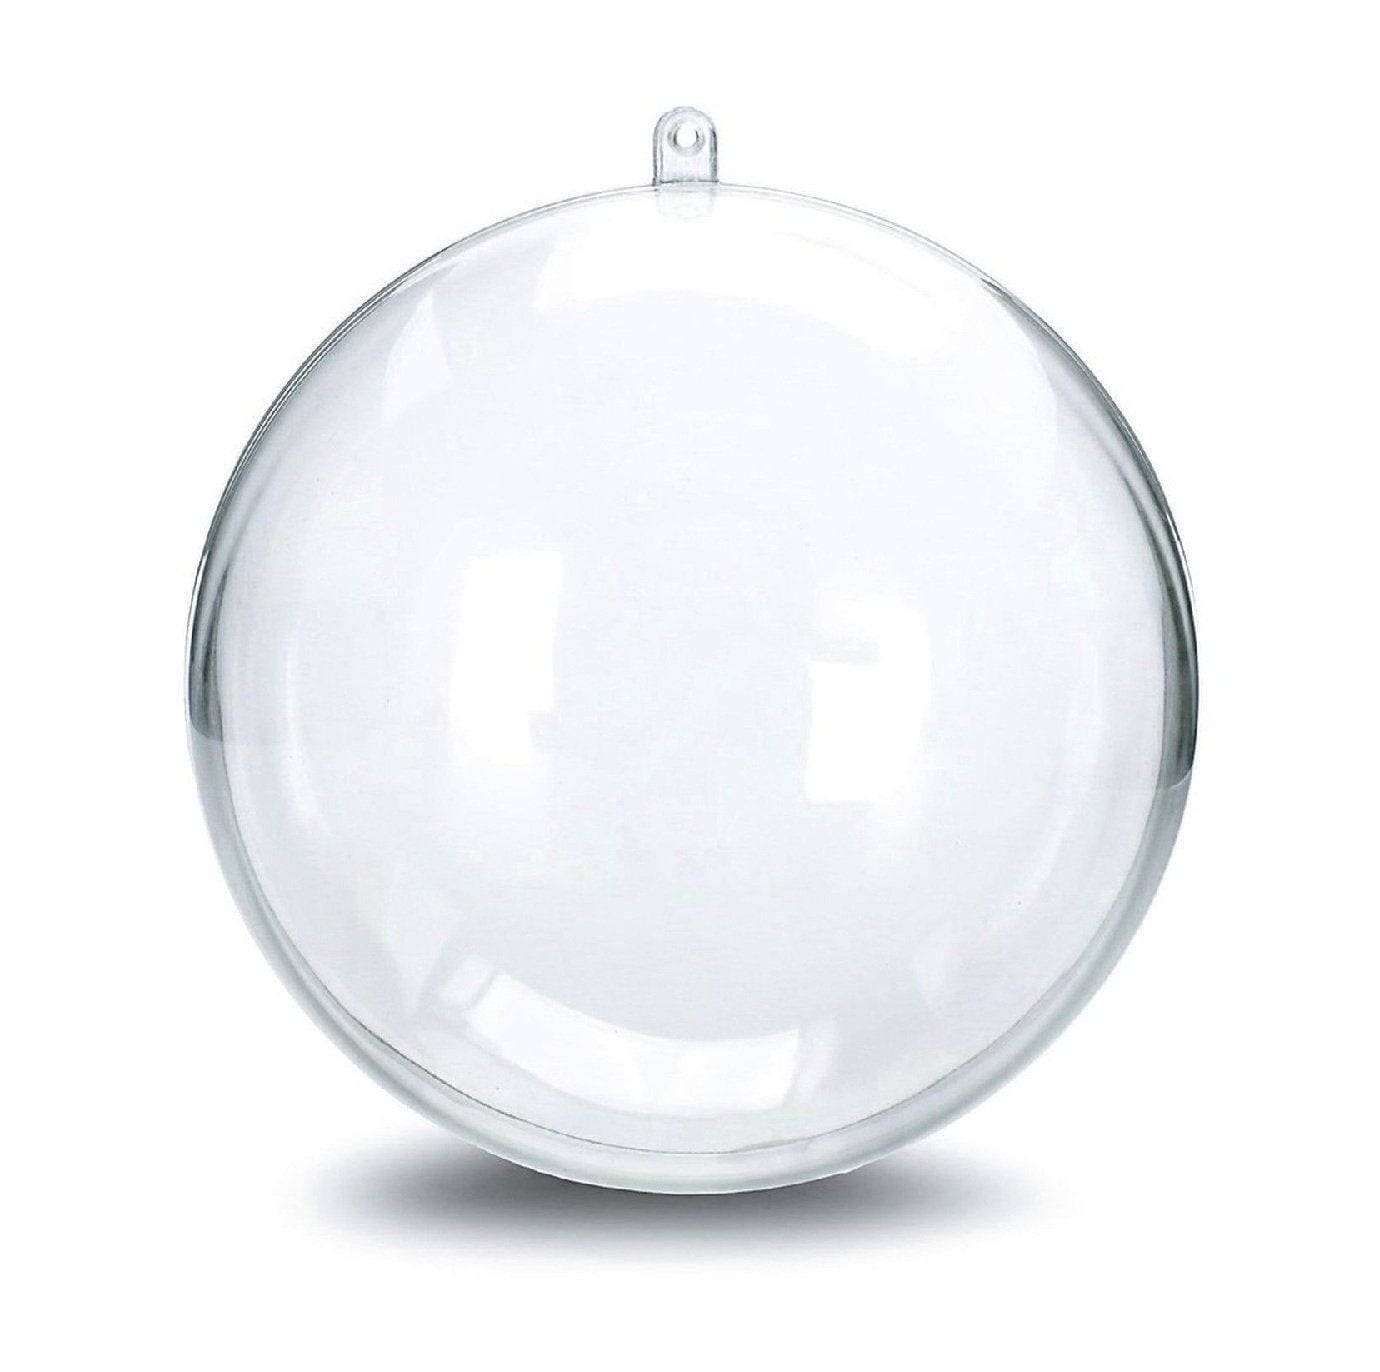 Aexit 20mm Diameter Electrical equipment Solid Round Acrylic Sphere Plexiglass Ball Ornament Clear 2pcs 